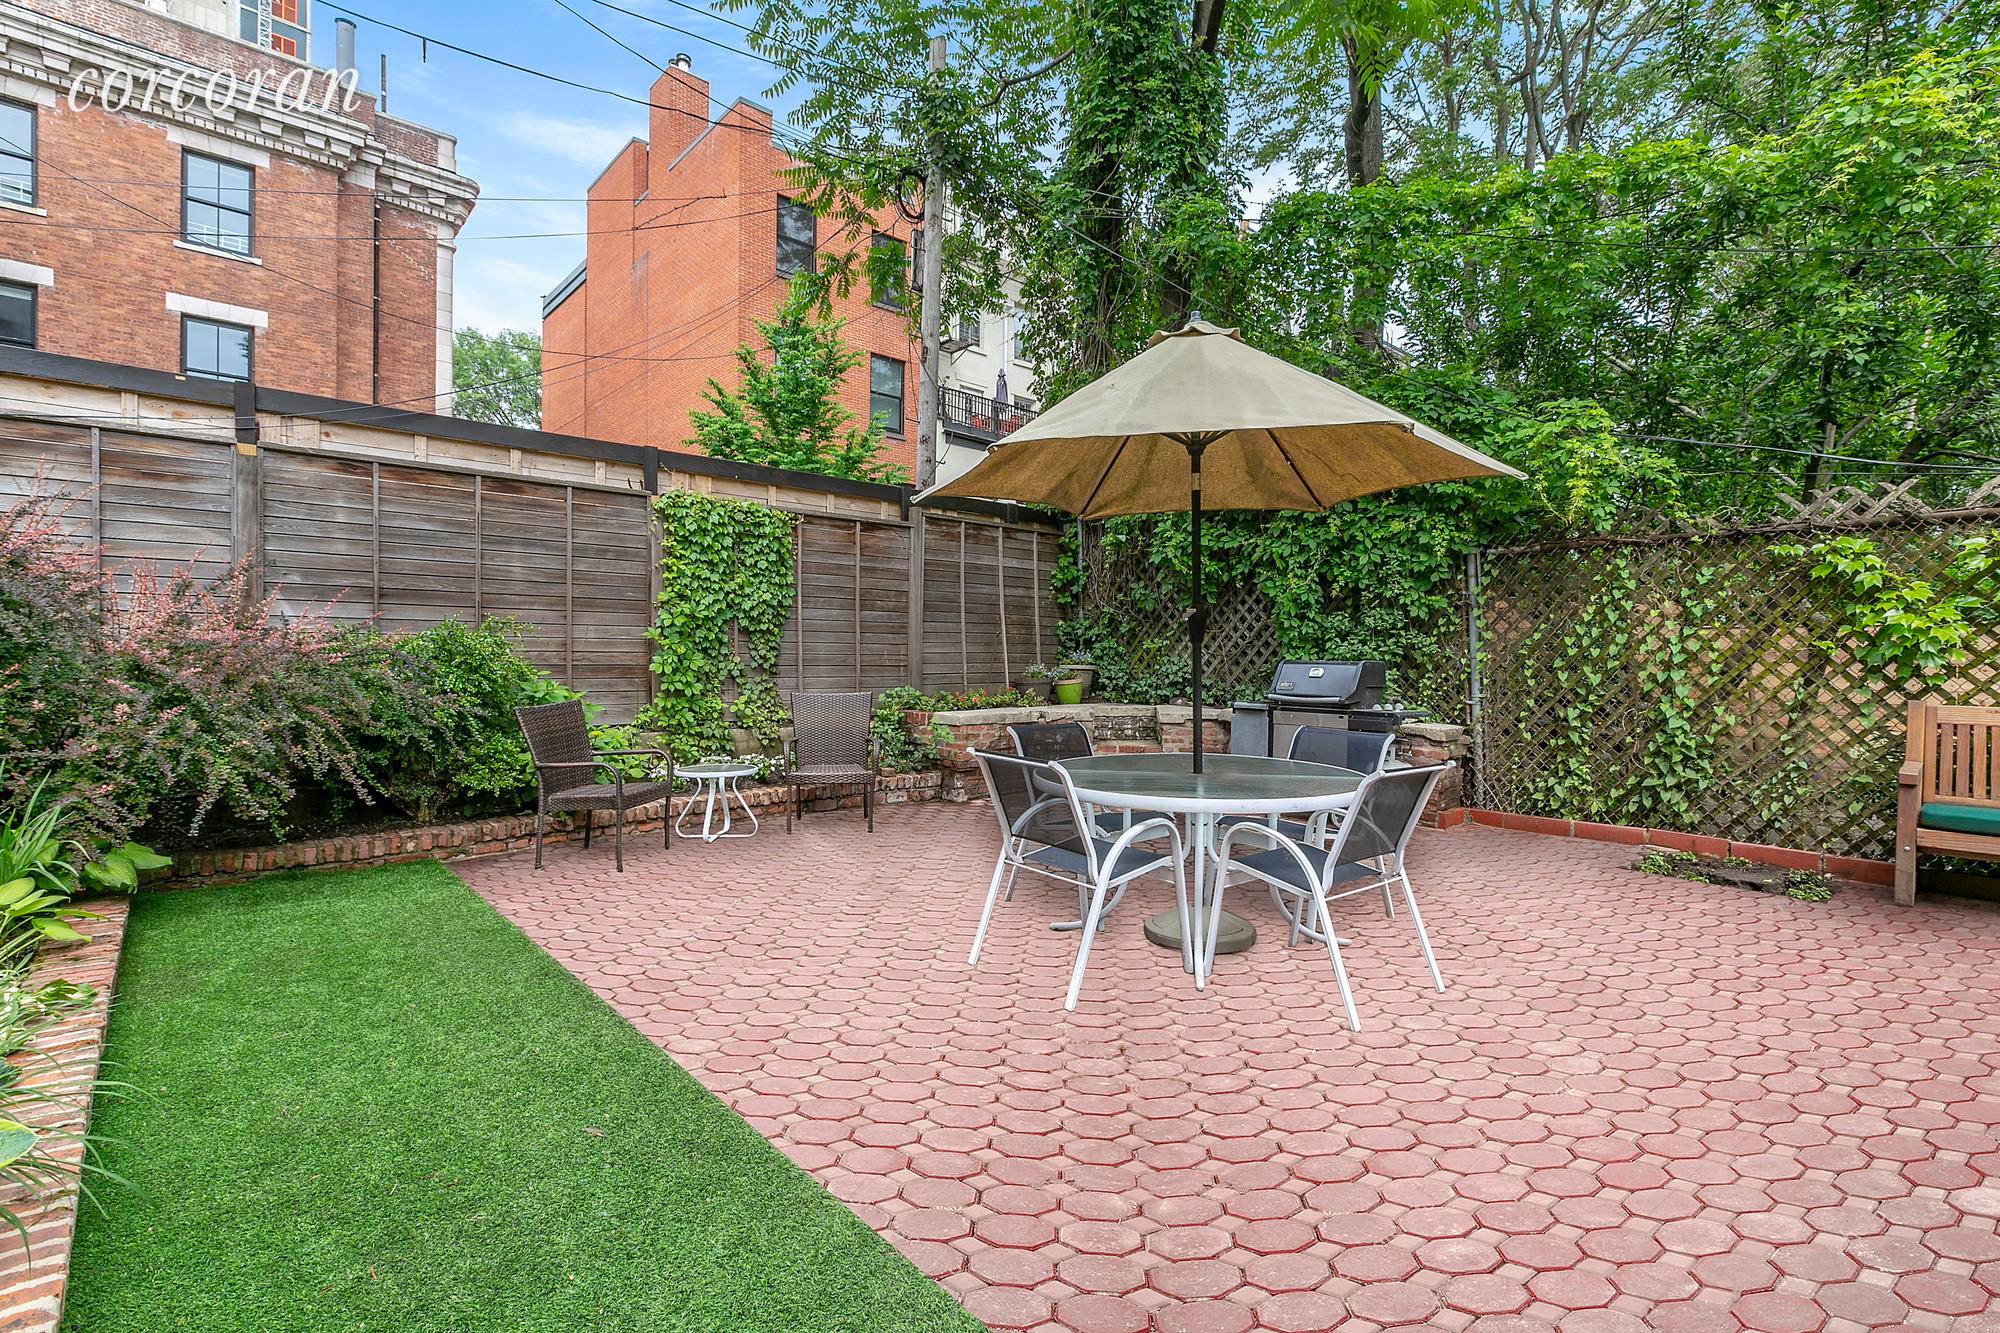 Cobble Hill two bedroom, two bath duplex with recreation room and stunning exclusive garden in classic brownstone.